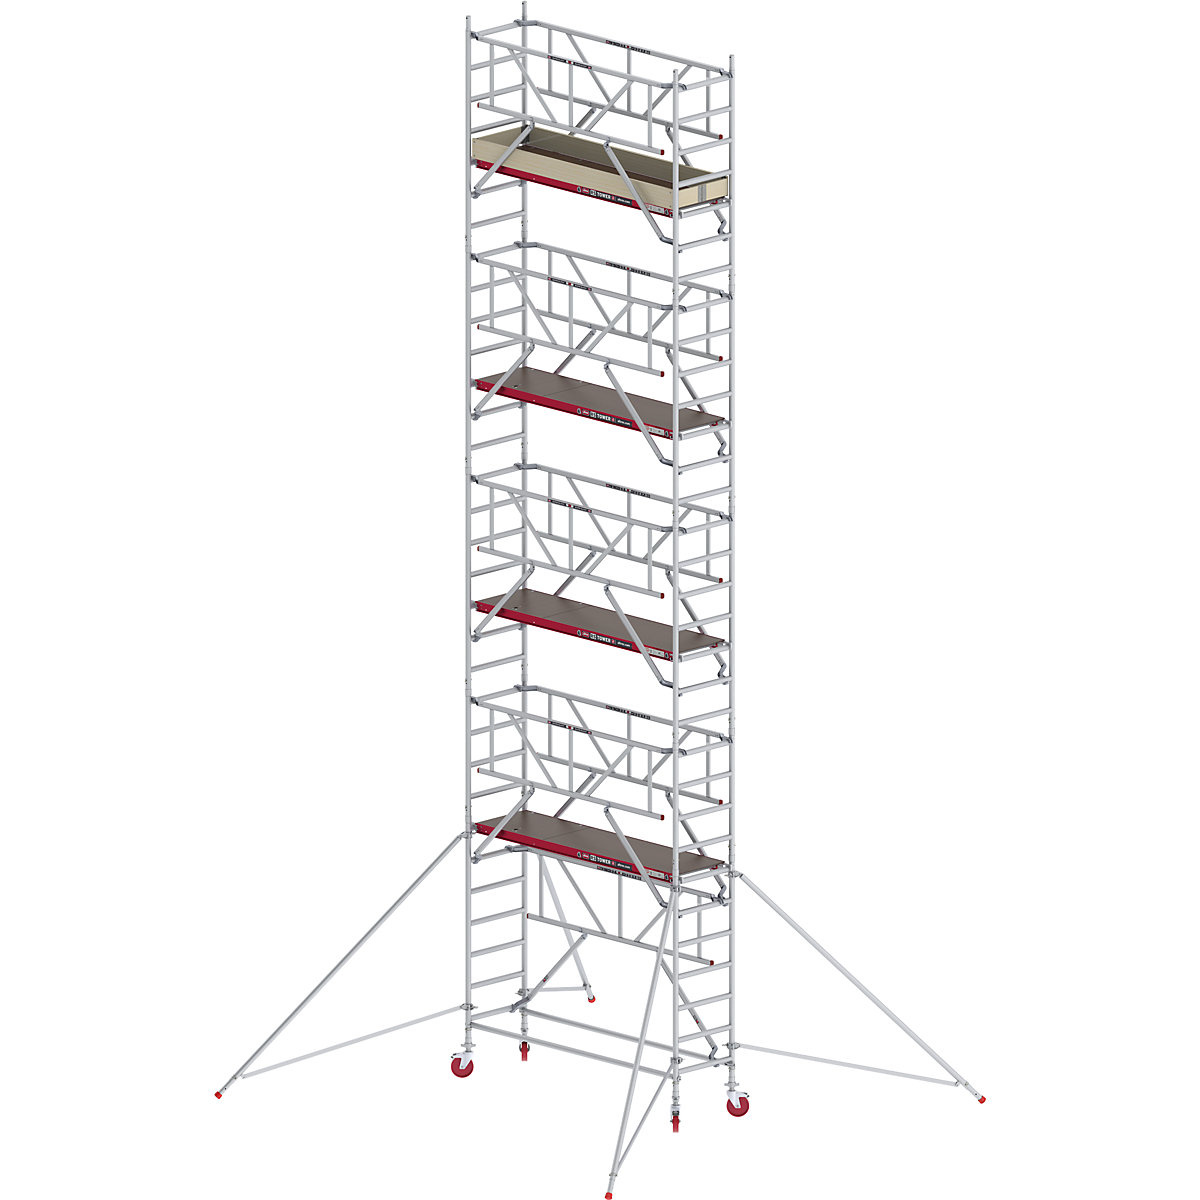 RS TOWER 41 slim mobile access tower with Safe-Quick® – Altrex, wooden platform, length 2.45 m, working height 10.20 m-7